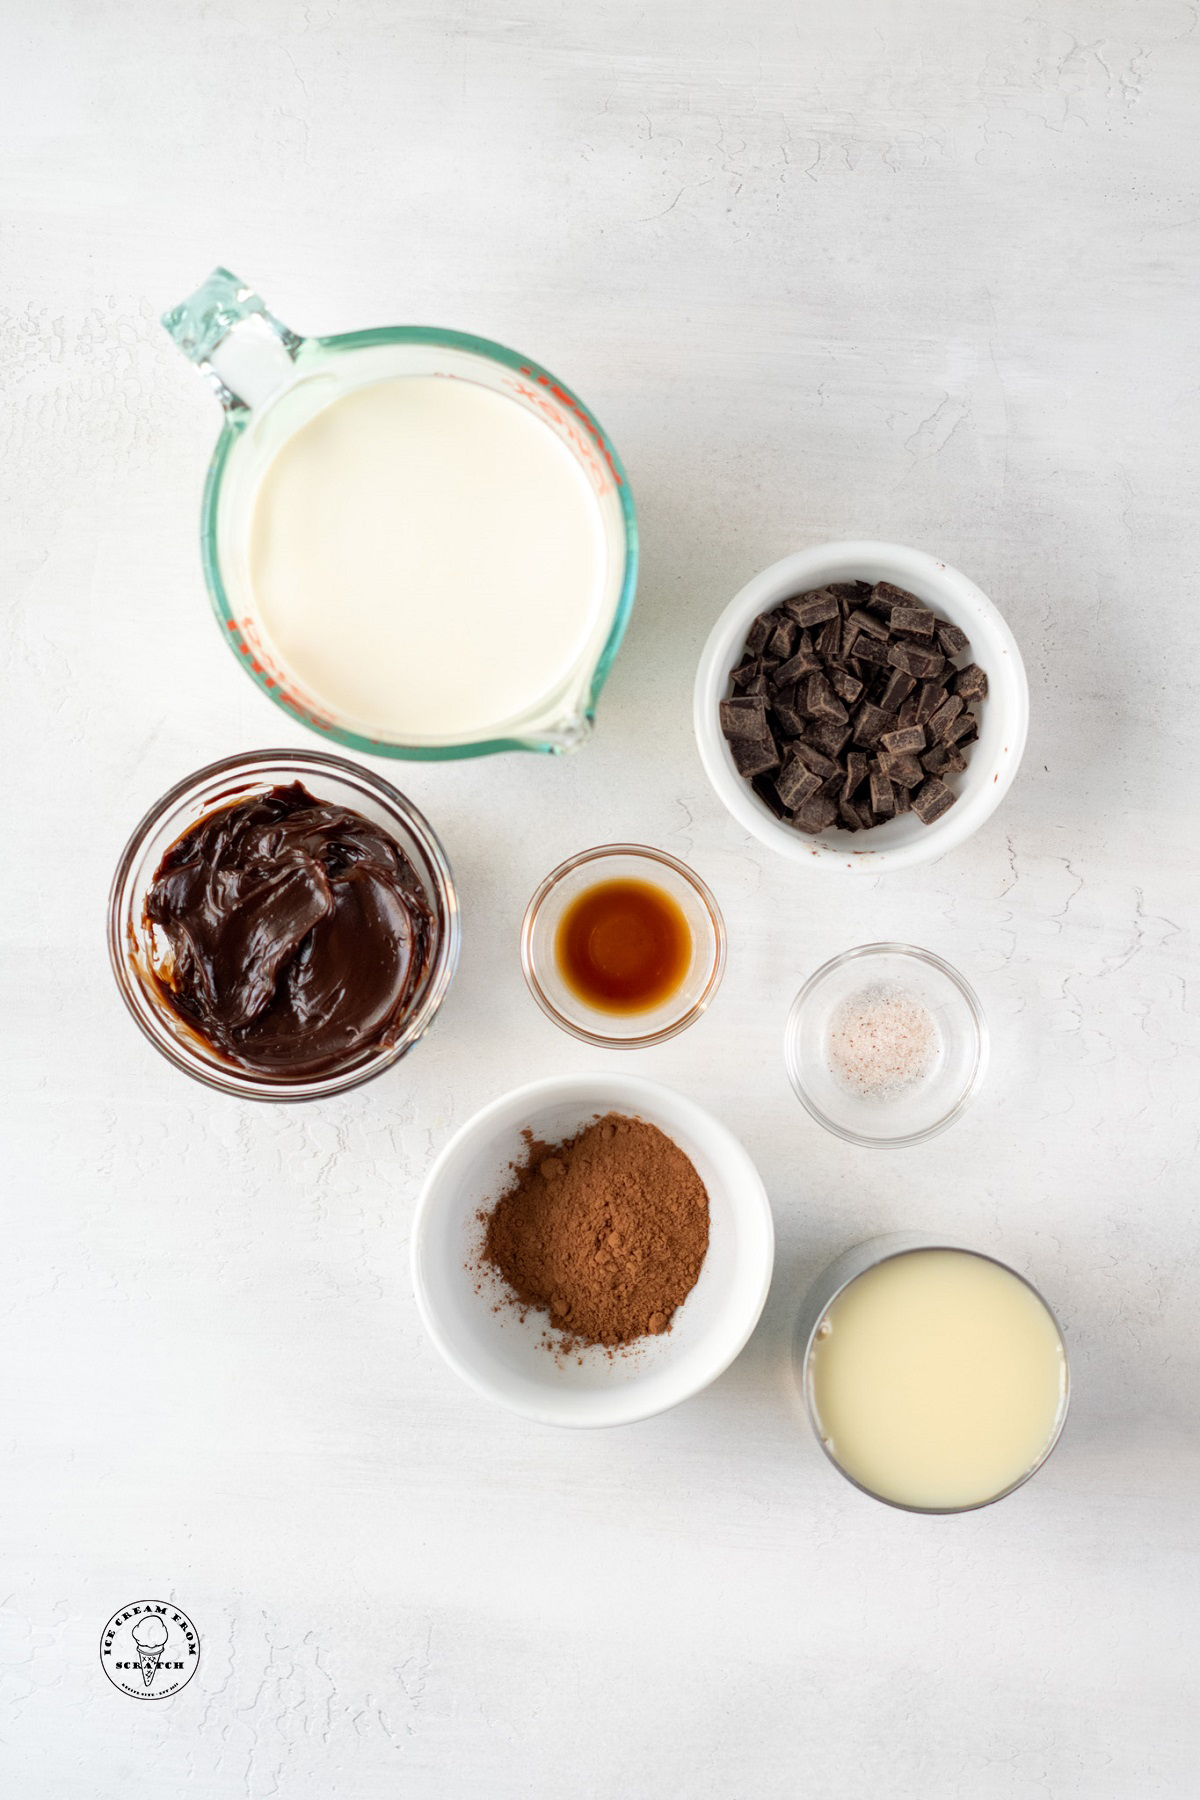 The ingredients for no churn death by chocolate ice cream, measured into individual bowls and arranged on a counter.